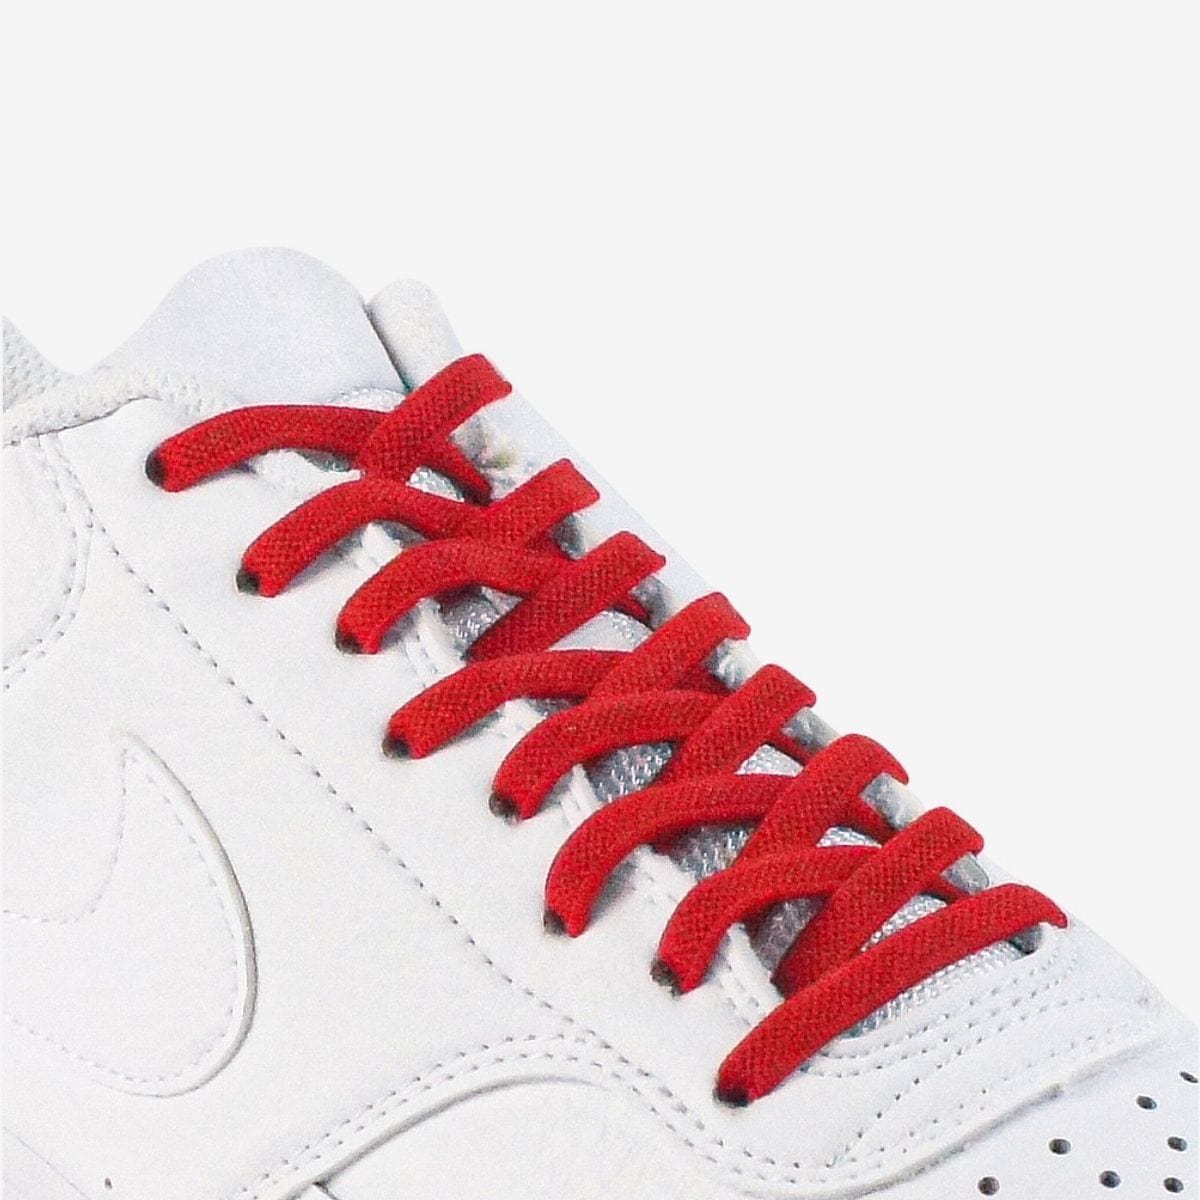 kids-no-tie-shoelaces-with-red-laces-on-nike-white-sneakers-by-kicks-shoelaces